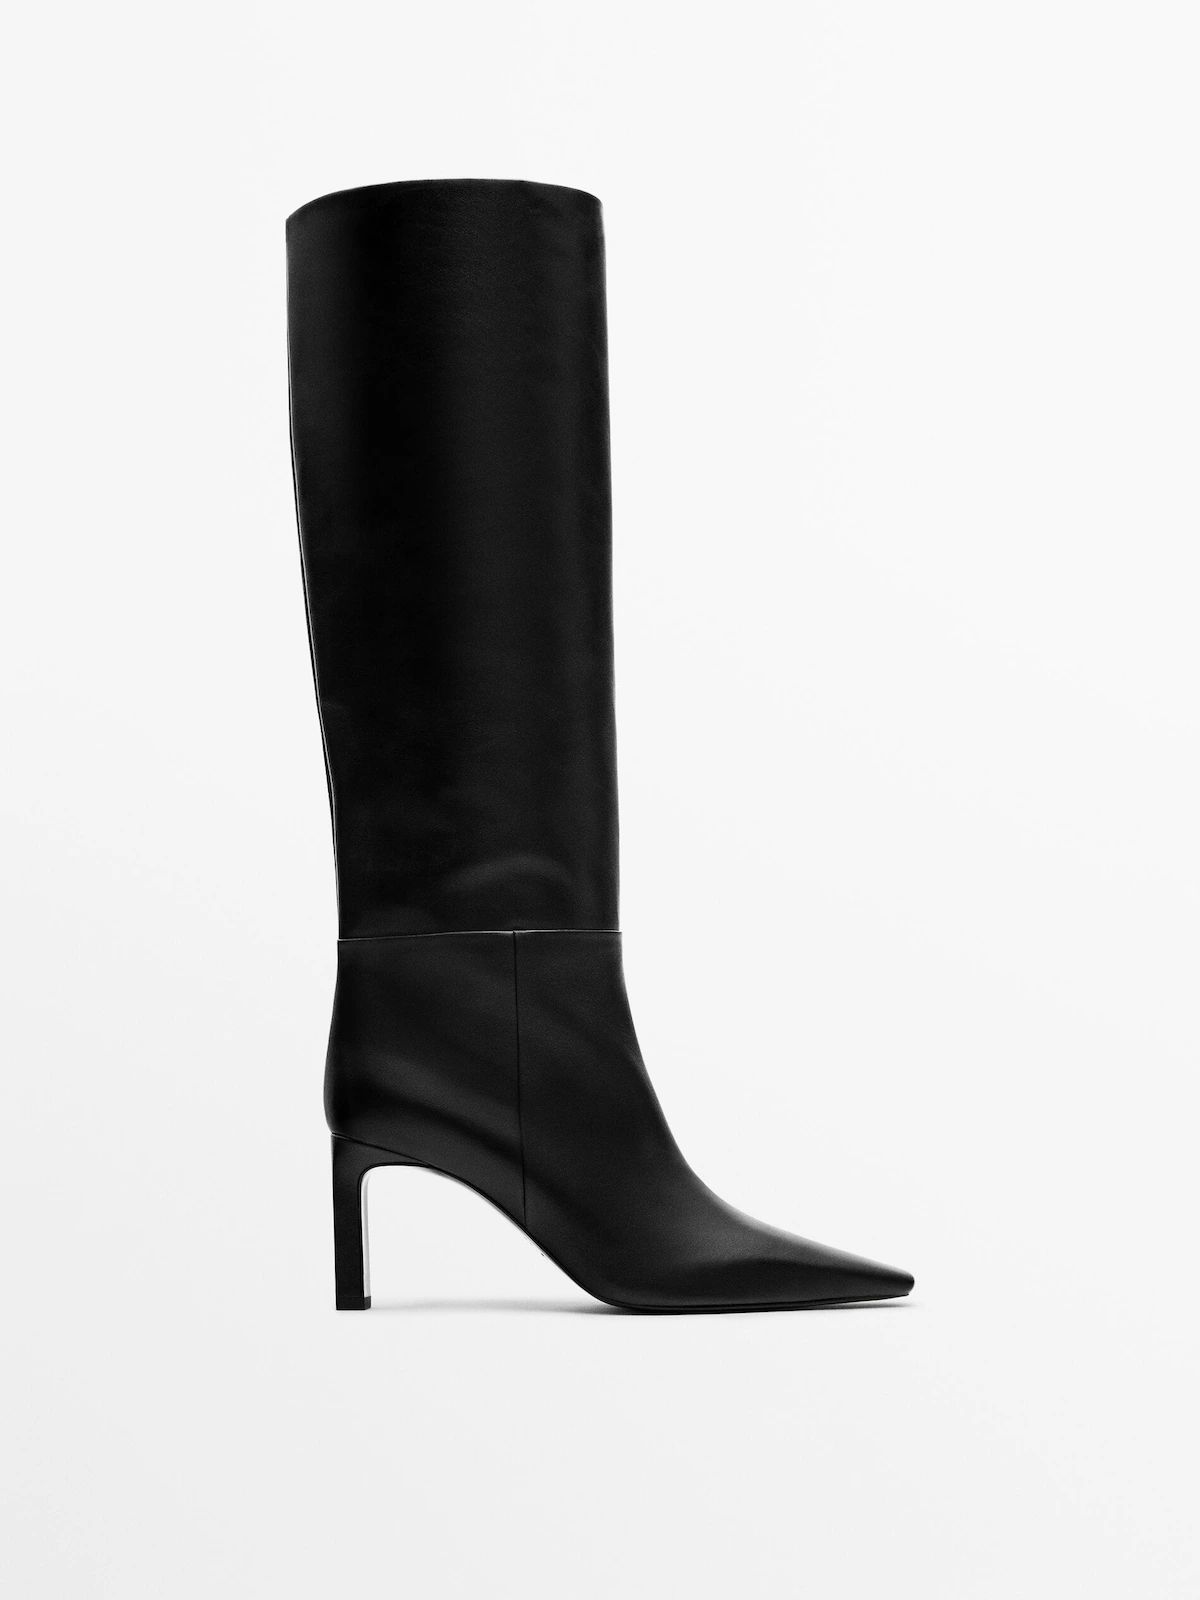 Leather boots with square heel | Massimo Dutti (US)